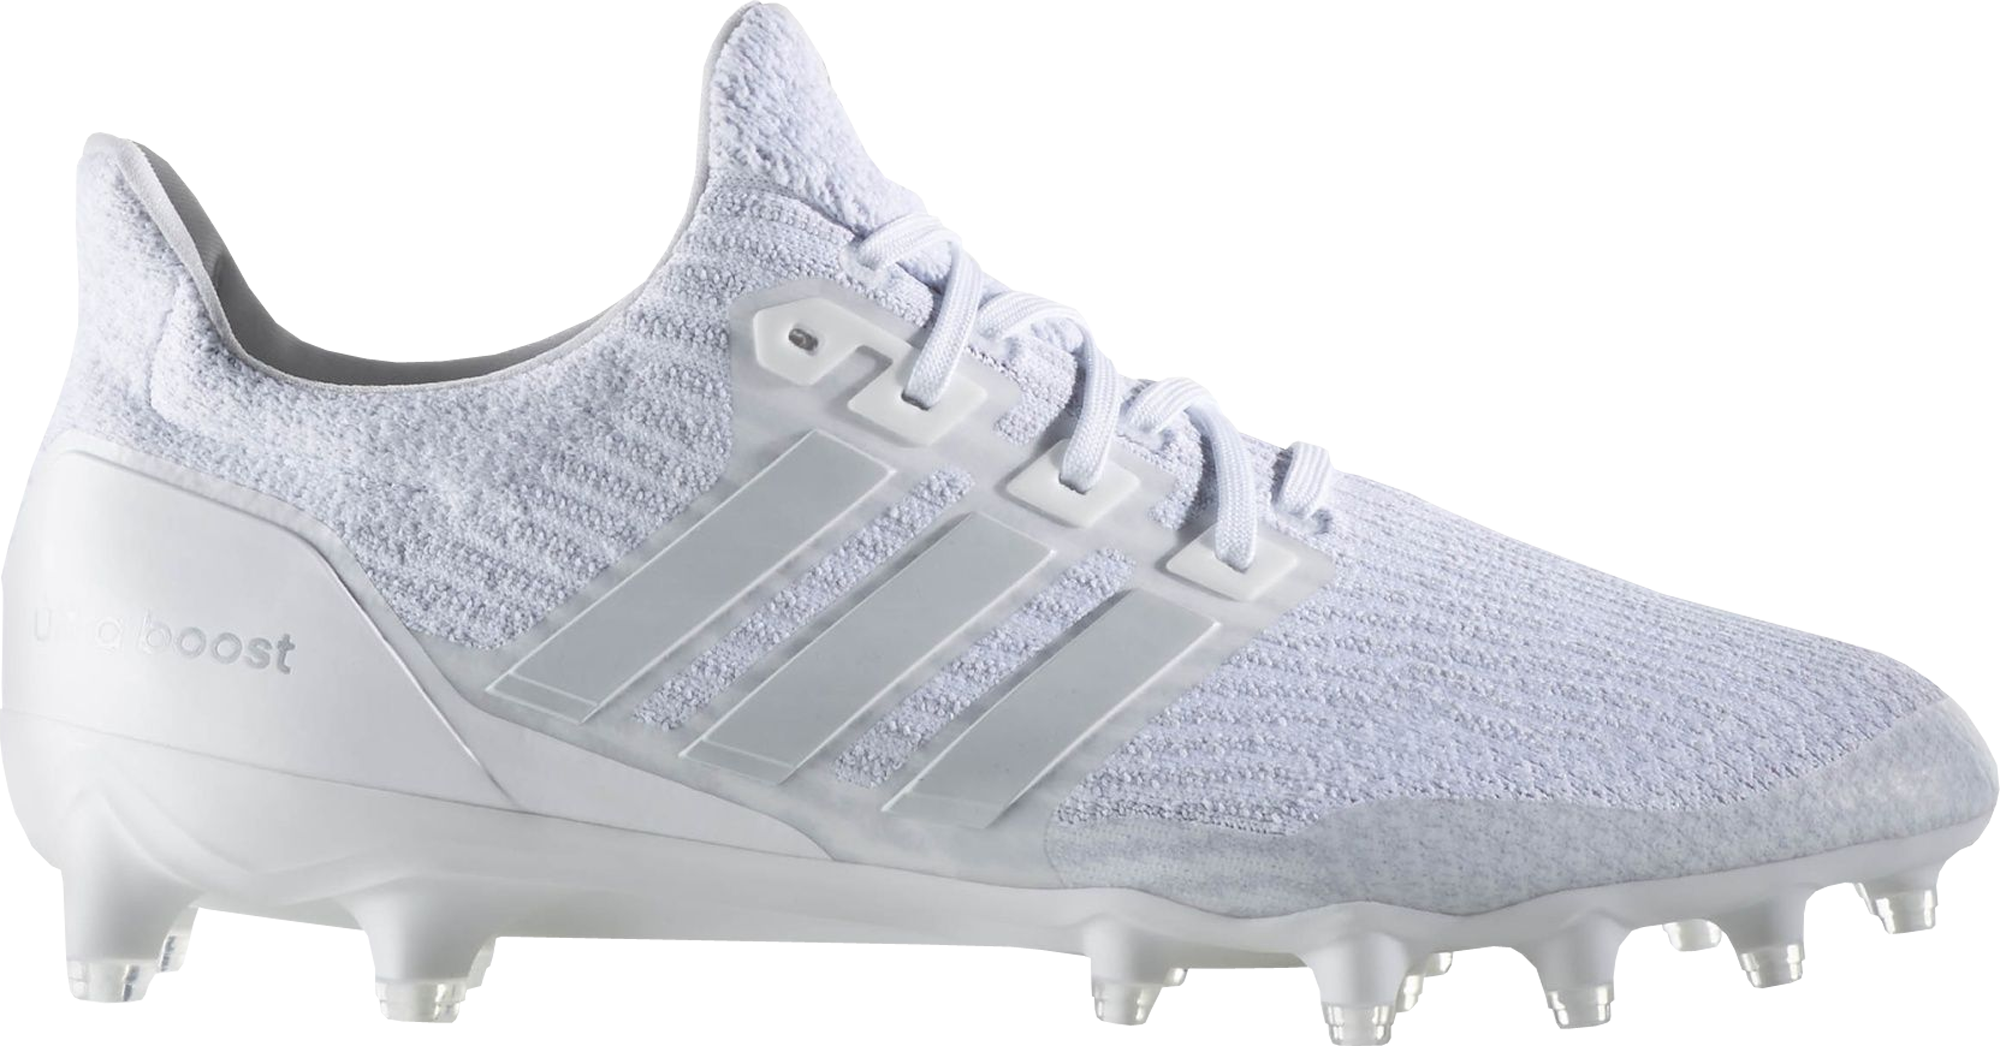 adidas ultra boost cleats for sale